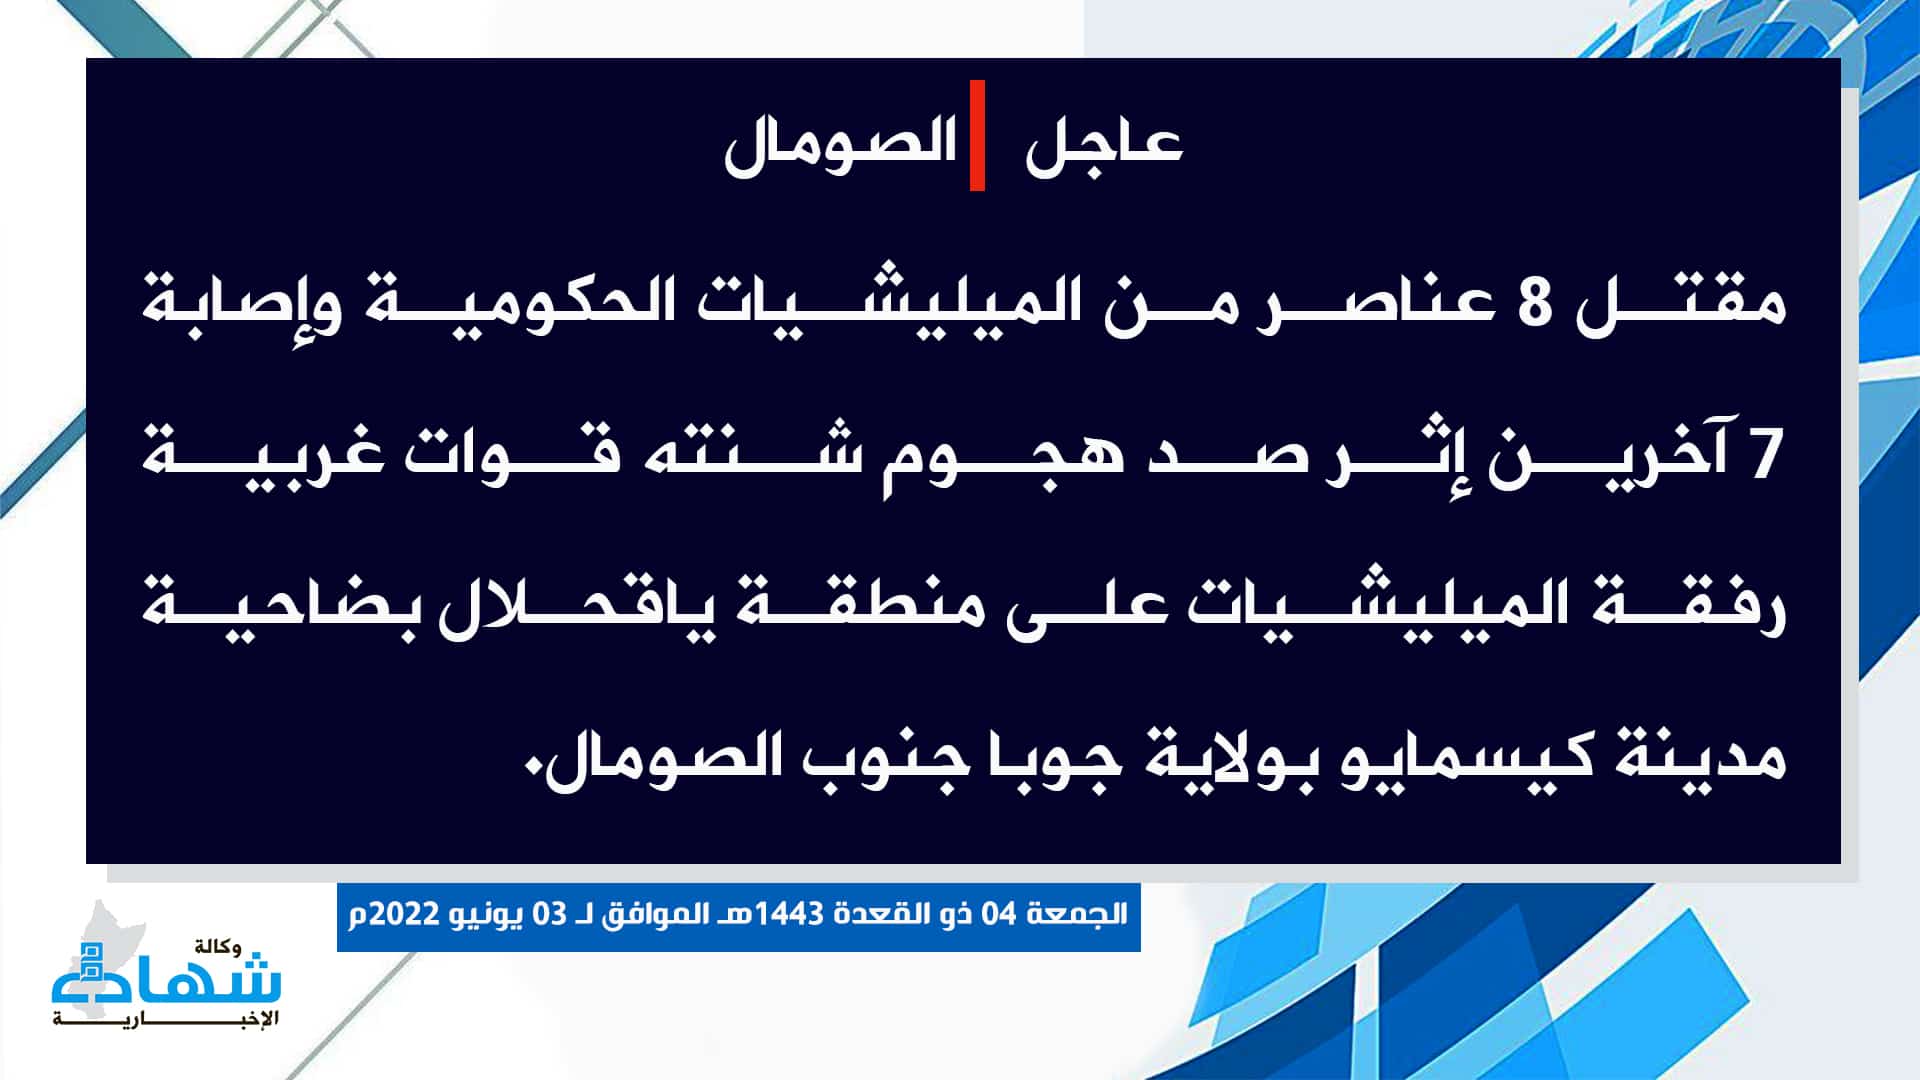 (Claim) al-Shabaab: Eight Somalian Forces Were Killed and Seven Others Were Wounded After Mujahideen Repelled an Attack on Yaqhlal, Kismayo City, Juba State, Southern Somalia - 3 June 2022